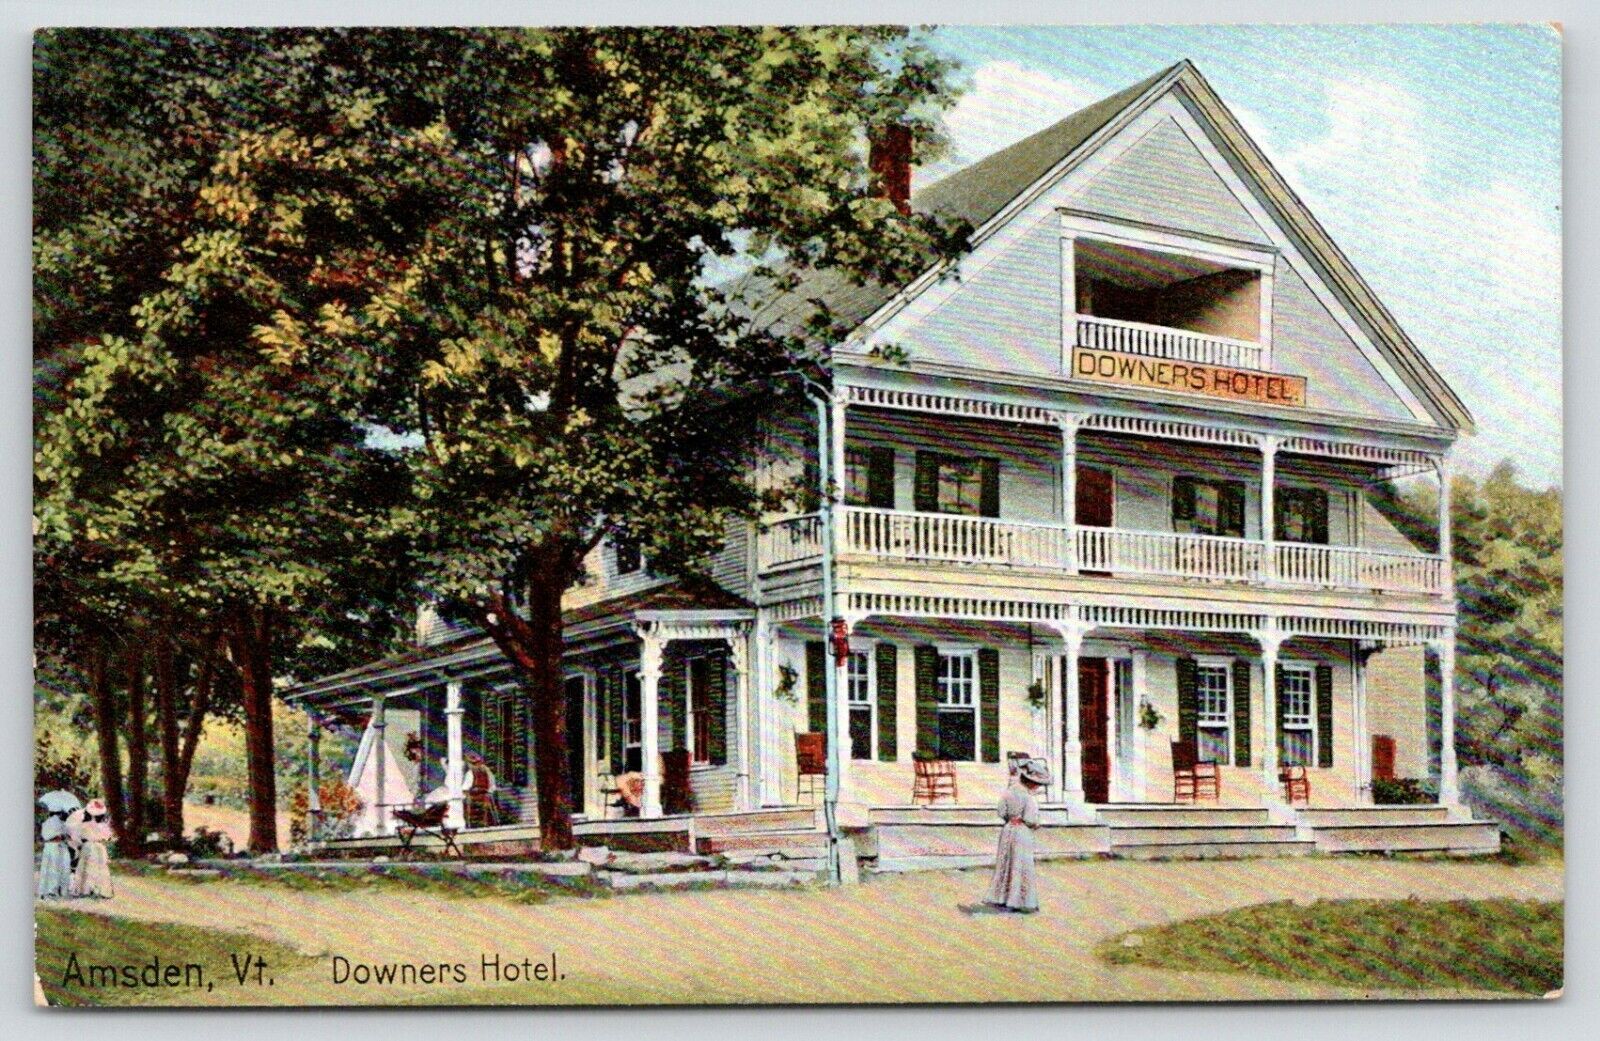 Amsden Vermont~Close-Up of Downers Hotel~Guests on the Porch~c1910 Postcard